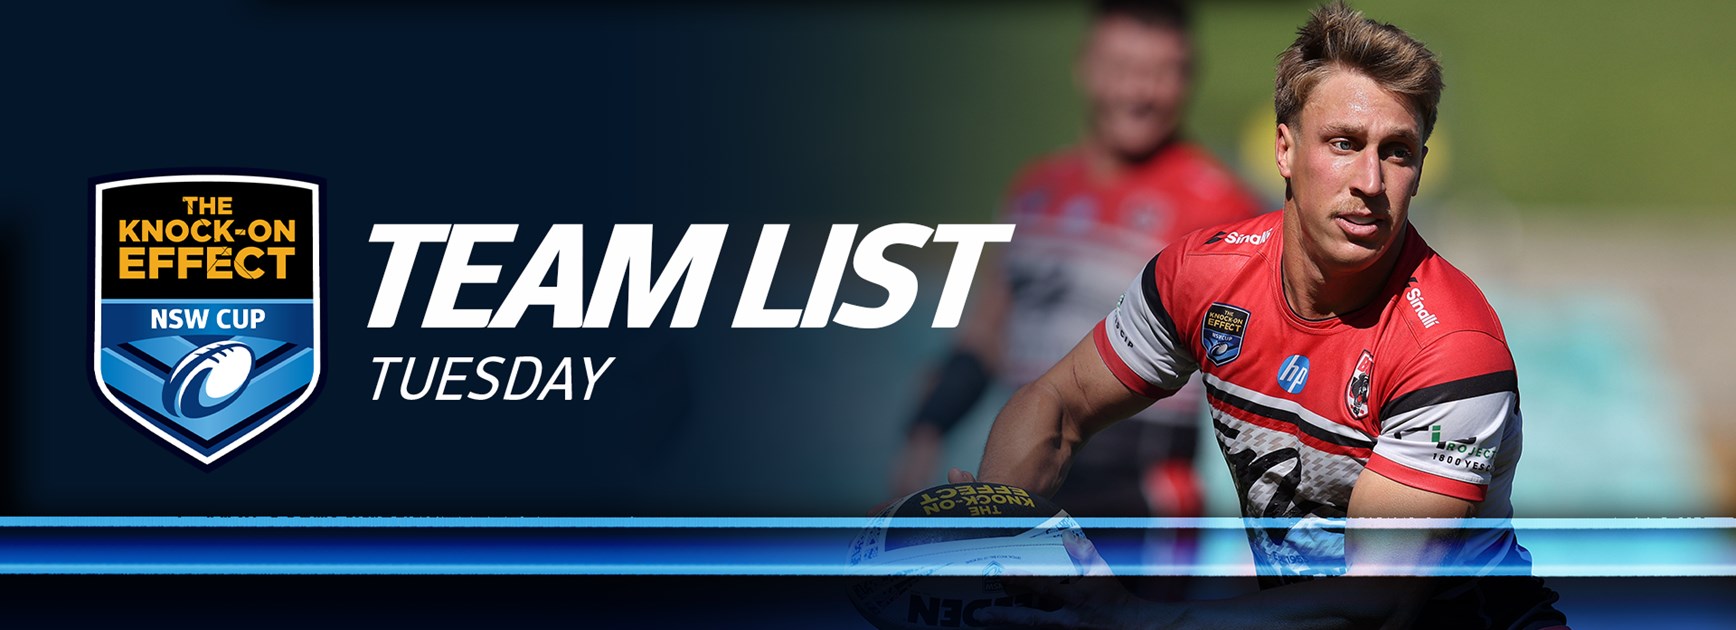 Team List Tuesday | The Knock-On Effect NSW Cup Grand Final